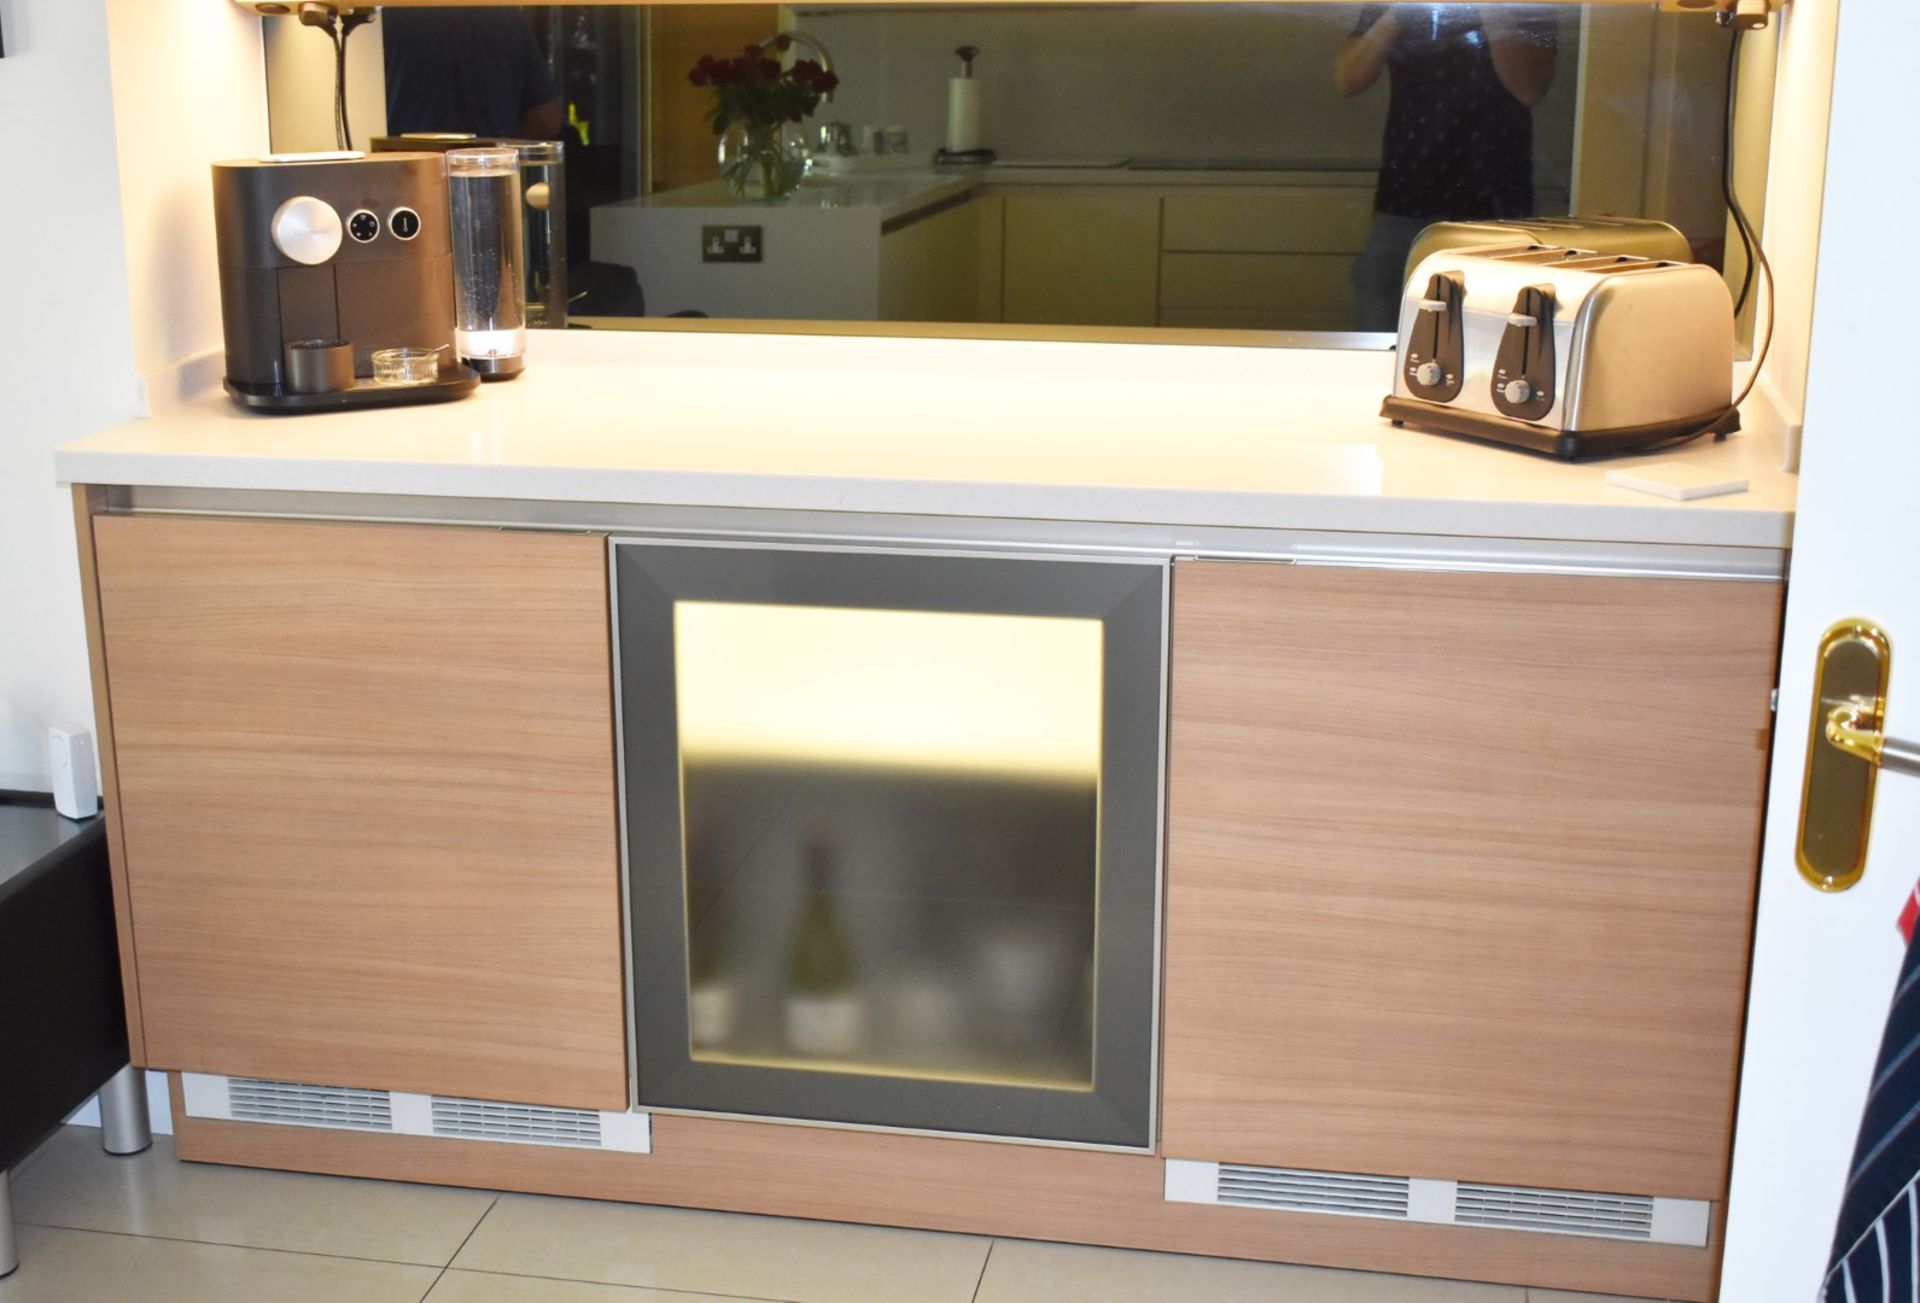 1 x Siematic Fitted Kitchen Unit Set With Integrated Fridge and Freezer, Smoked Glass and Beech - Image 3 of 12